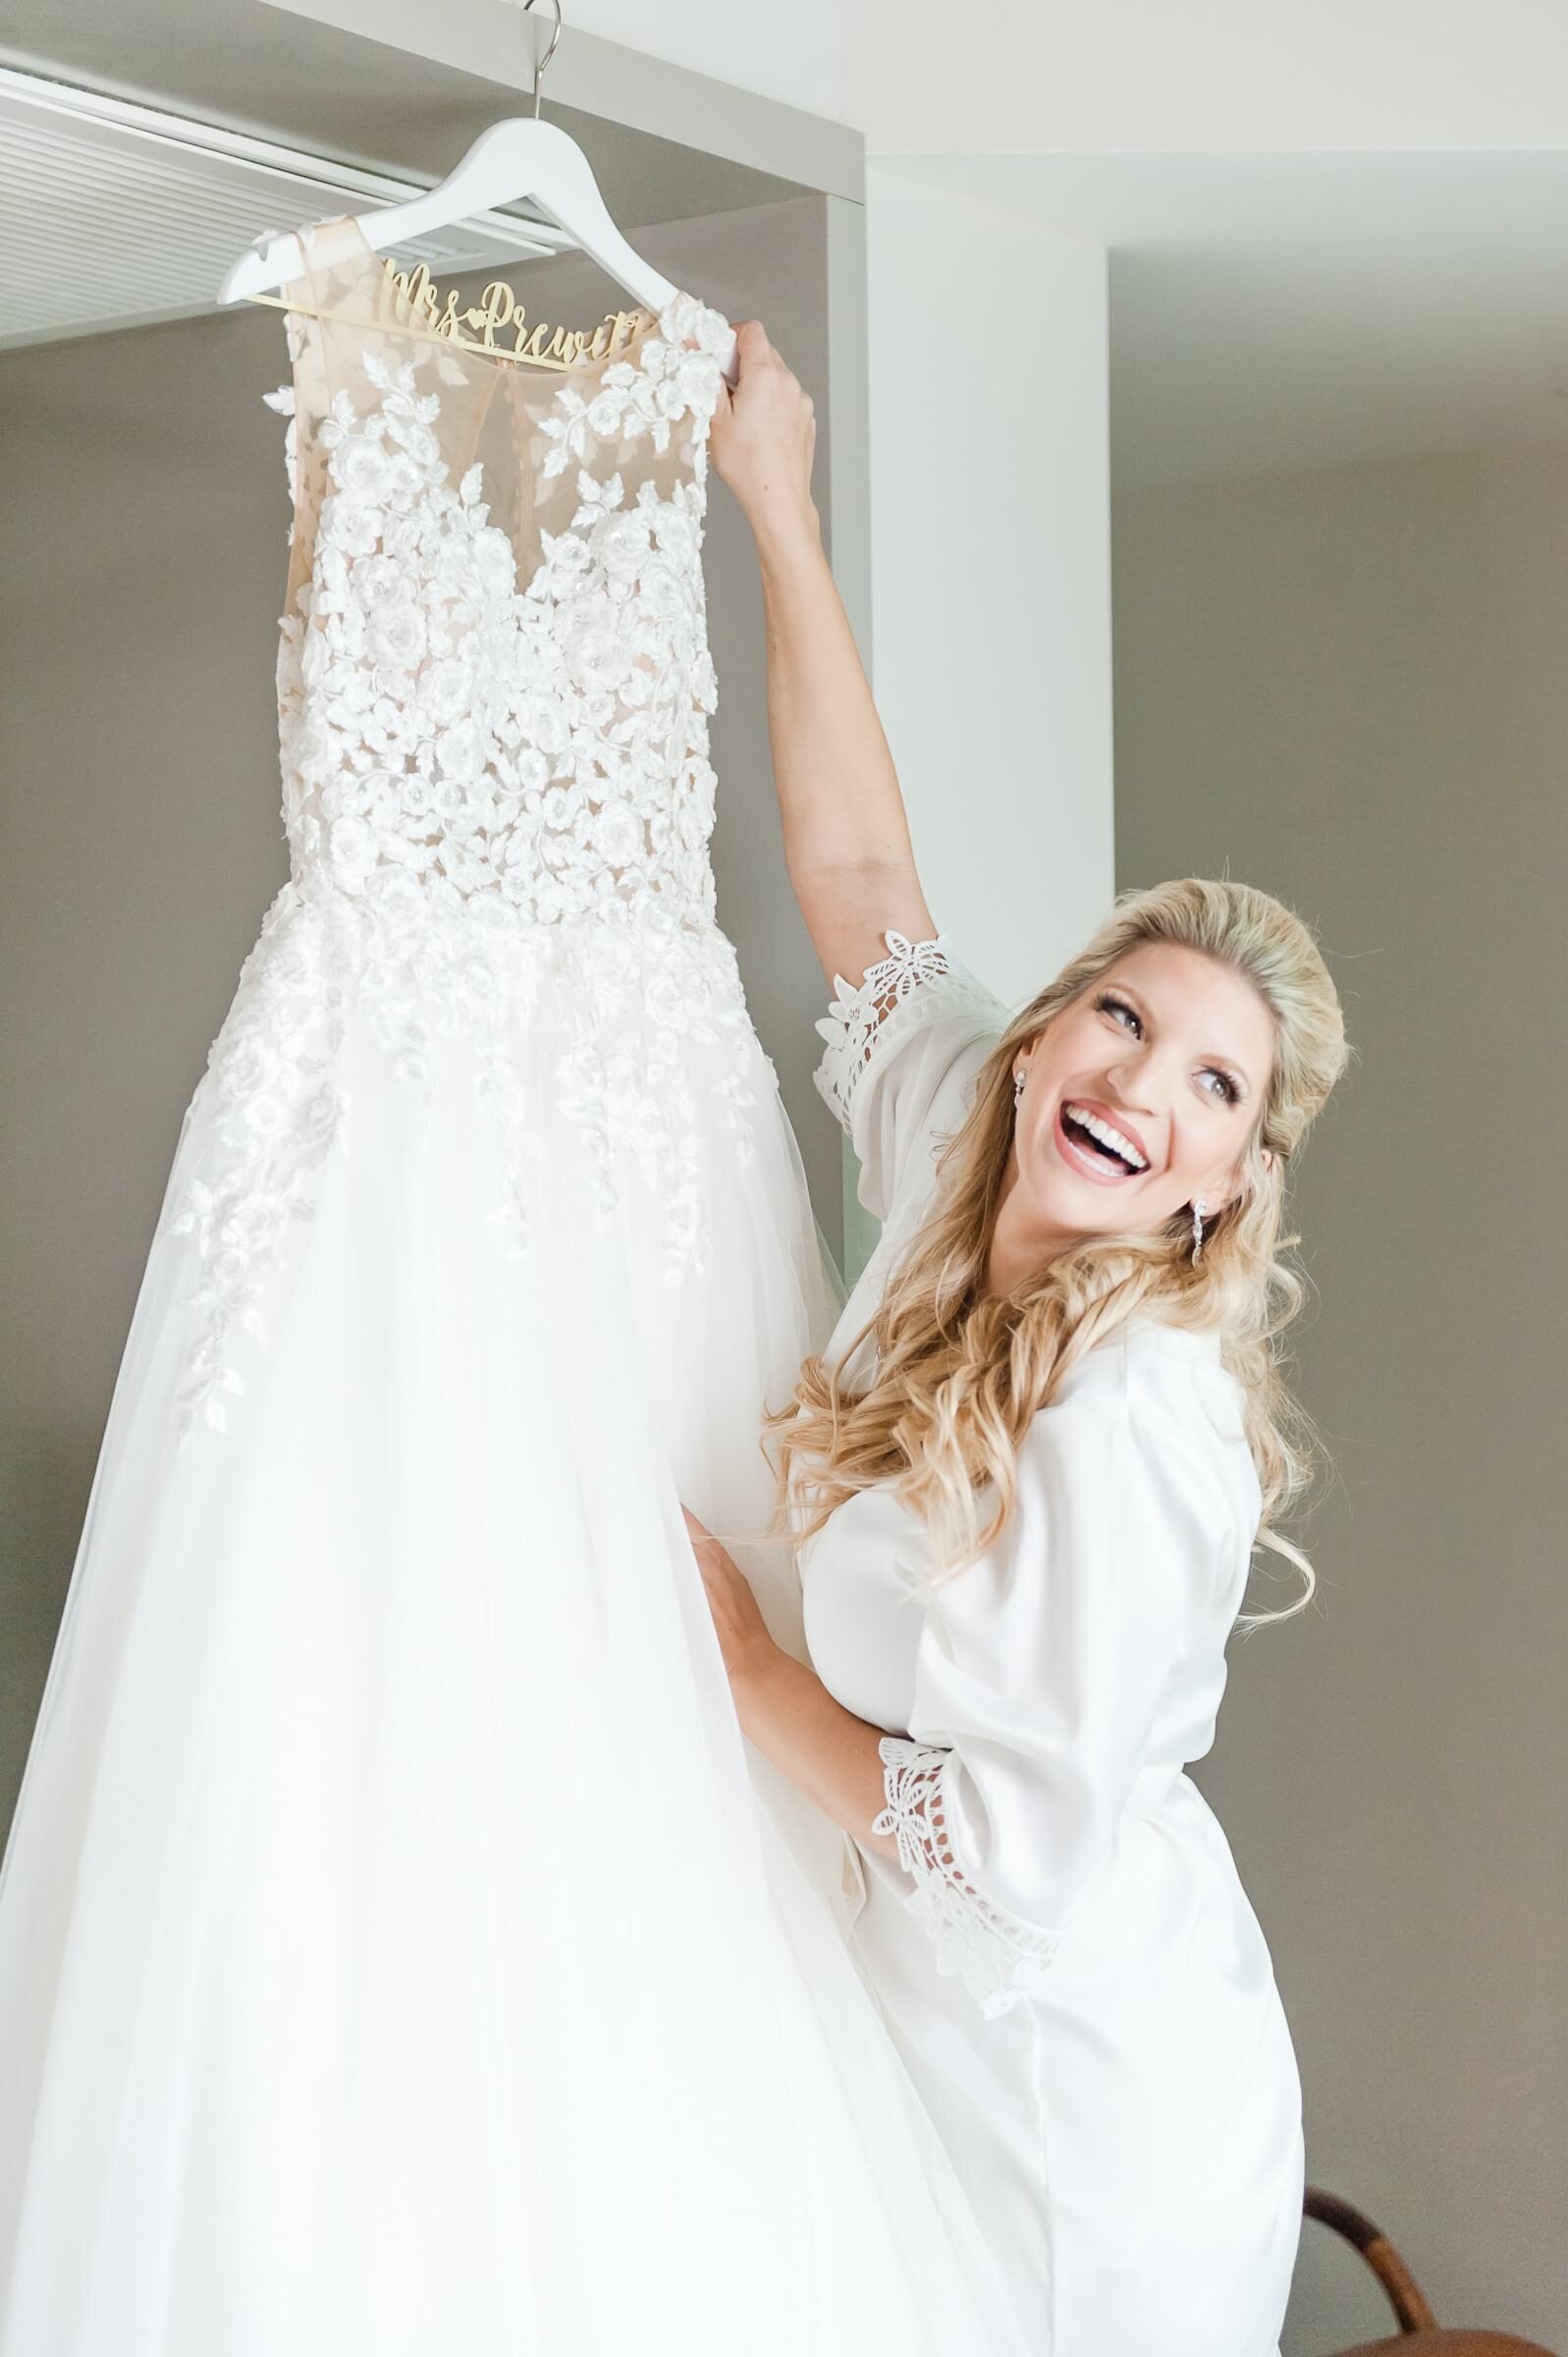 Bride laughing with bridal gown.